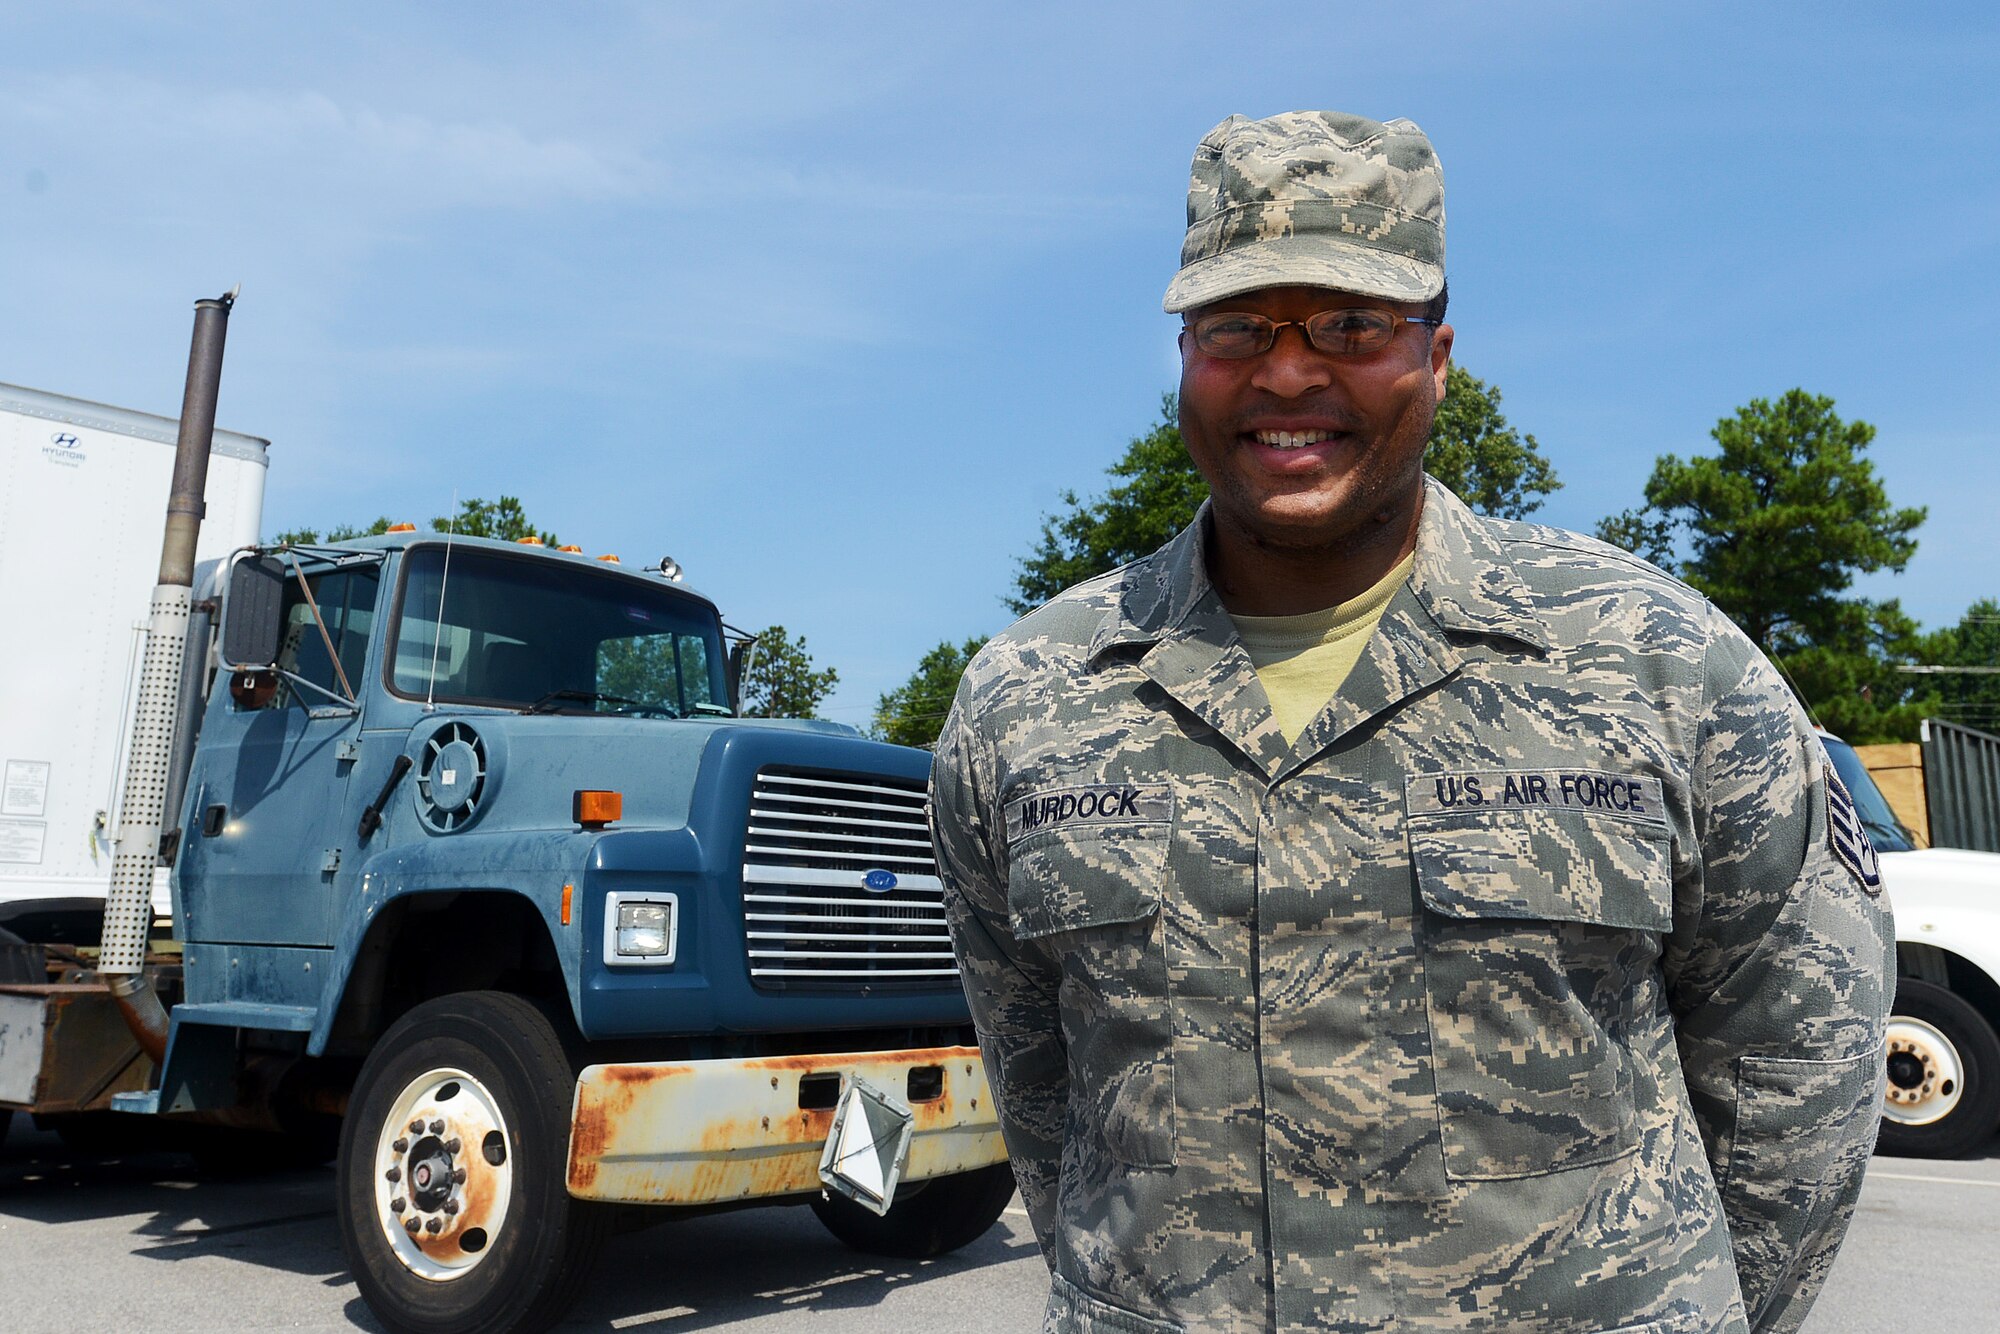 U.S. Air Force Staff Sgt. Scott Murdock, 20th Logistics Readiness Squadron Vehicle Operations Control Center supervisor, stands in front of the trucks he manages logistics for at Shaw Air Force Base, S.C., July 20, 2015. Murdock was diagnosed with soft tissue sarcoma in 2014 after returning from a six month deployment to Afghanistan and battled the cancer for approximately a year-and-a-half until he was cancer free. (U.S. Air Force photo by Senior Airman Diana M. Cossaboom/Released)